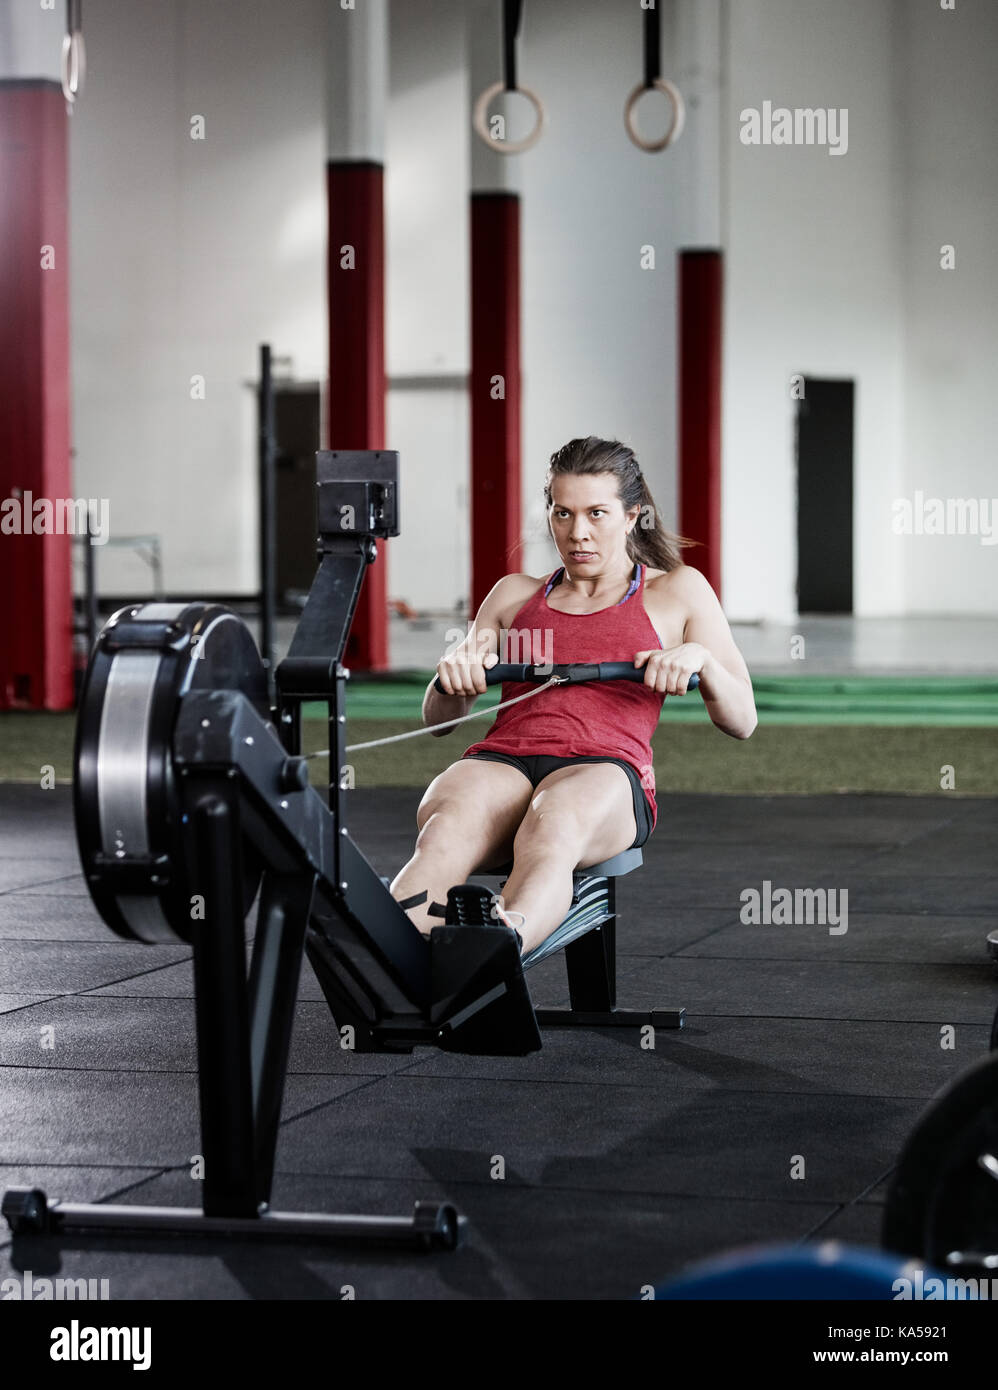 Fit Woman Exercising On Rowing Machine Stock Photo